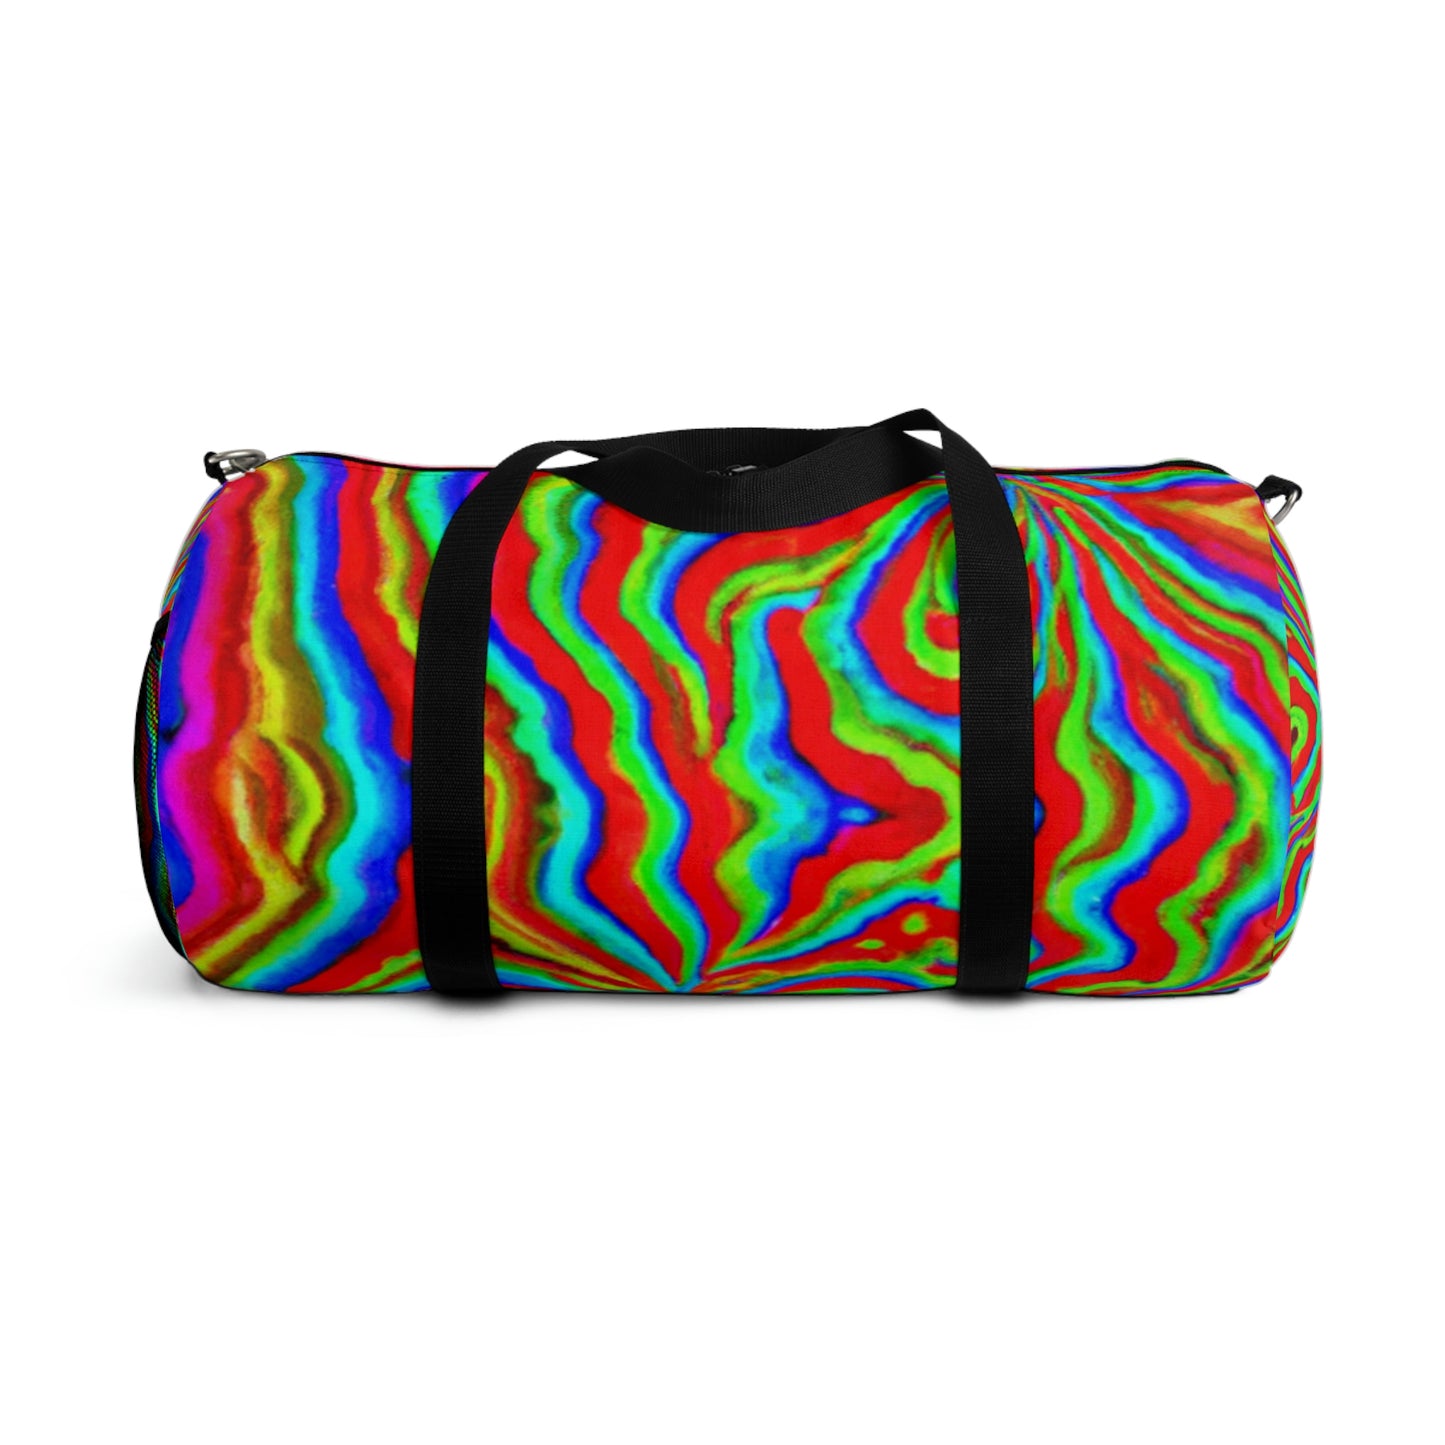 Scarville Luxury - Psychedelic Duffel Bag